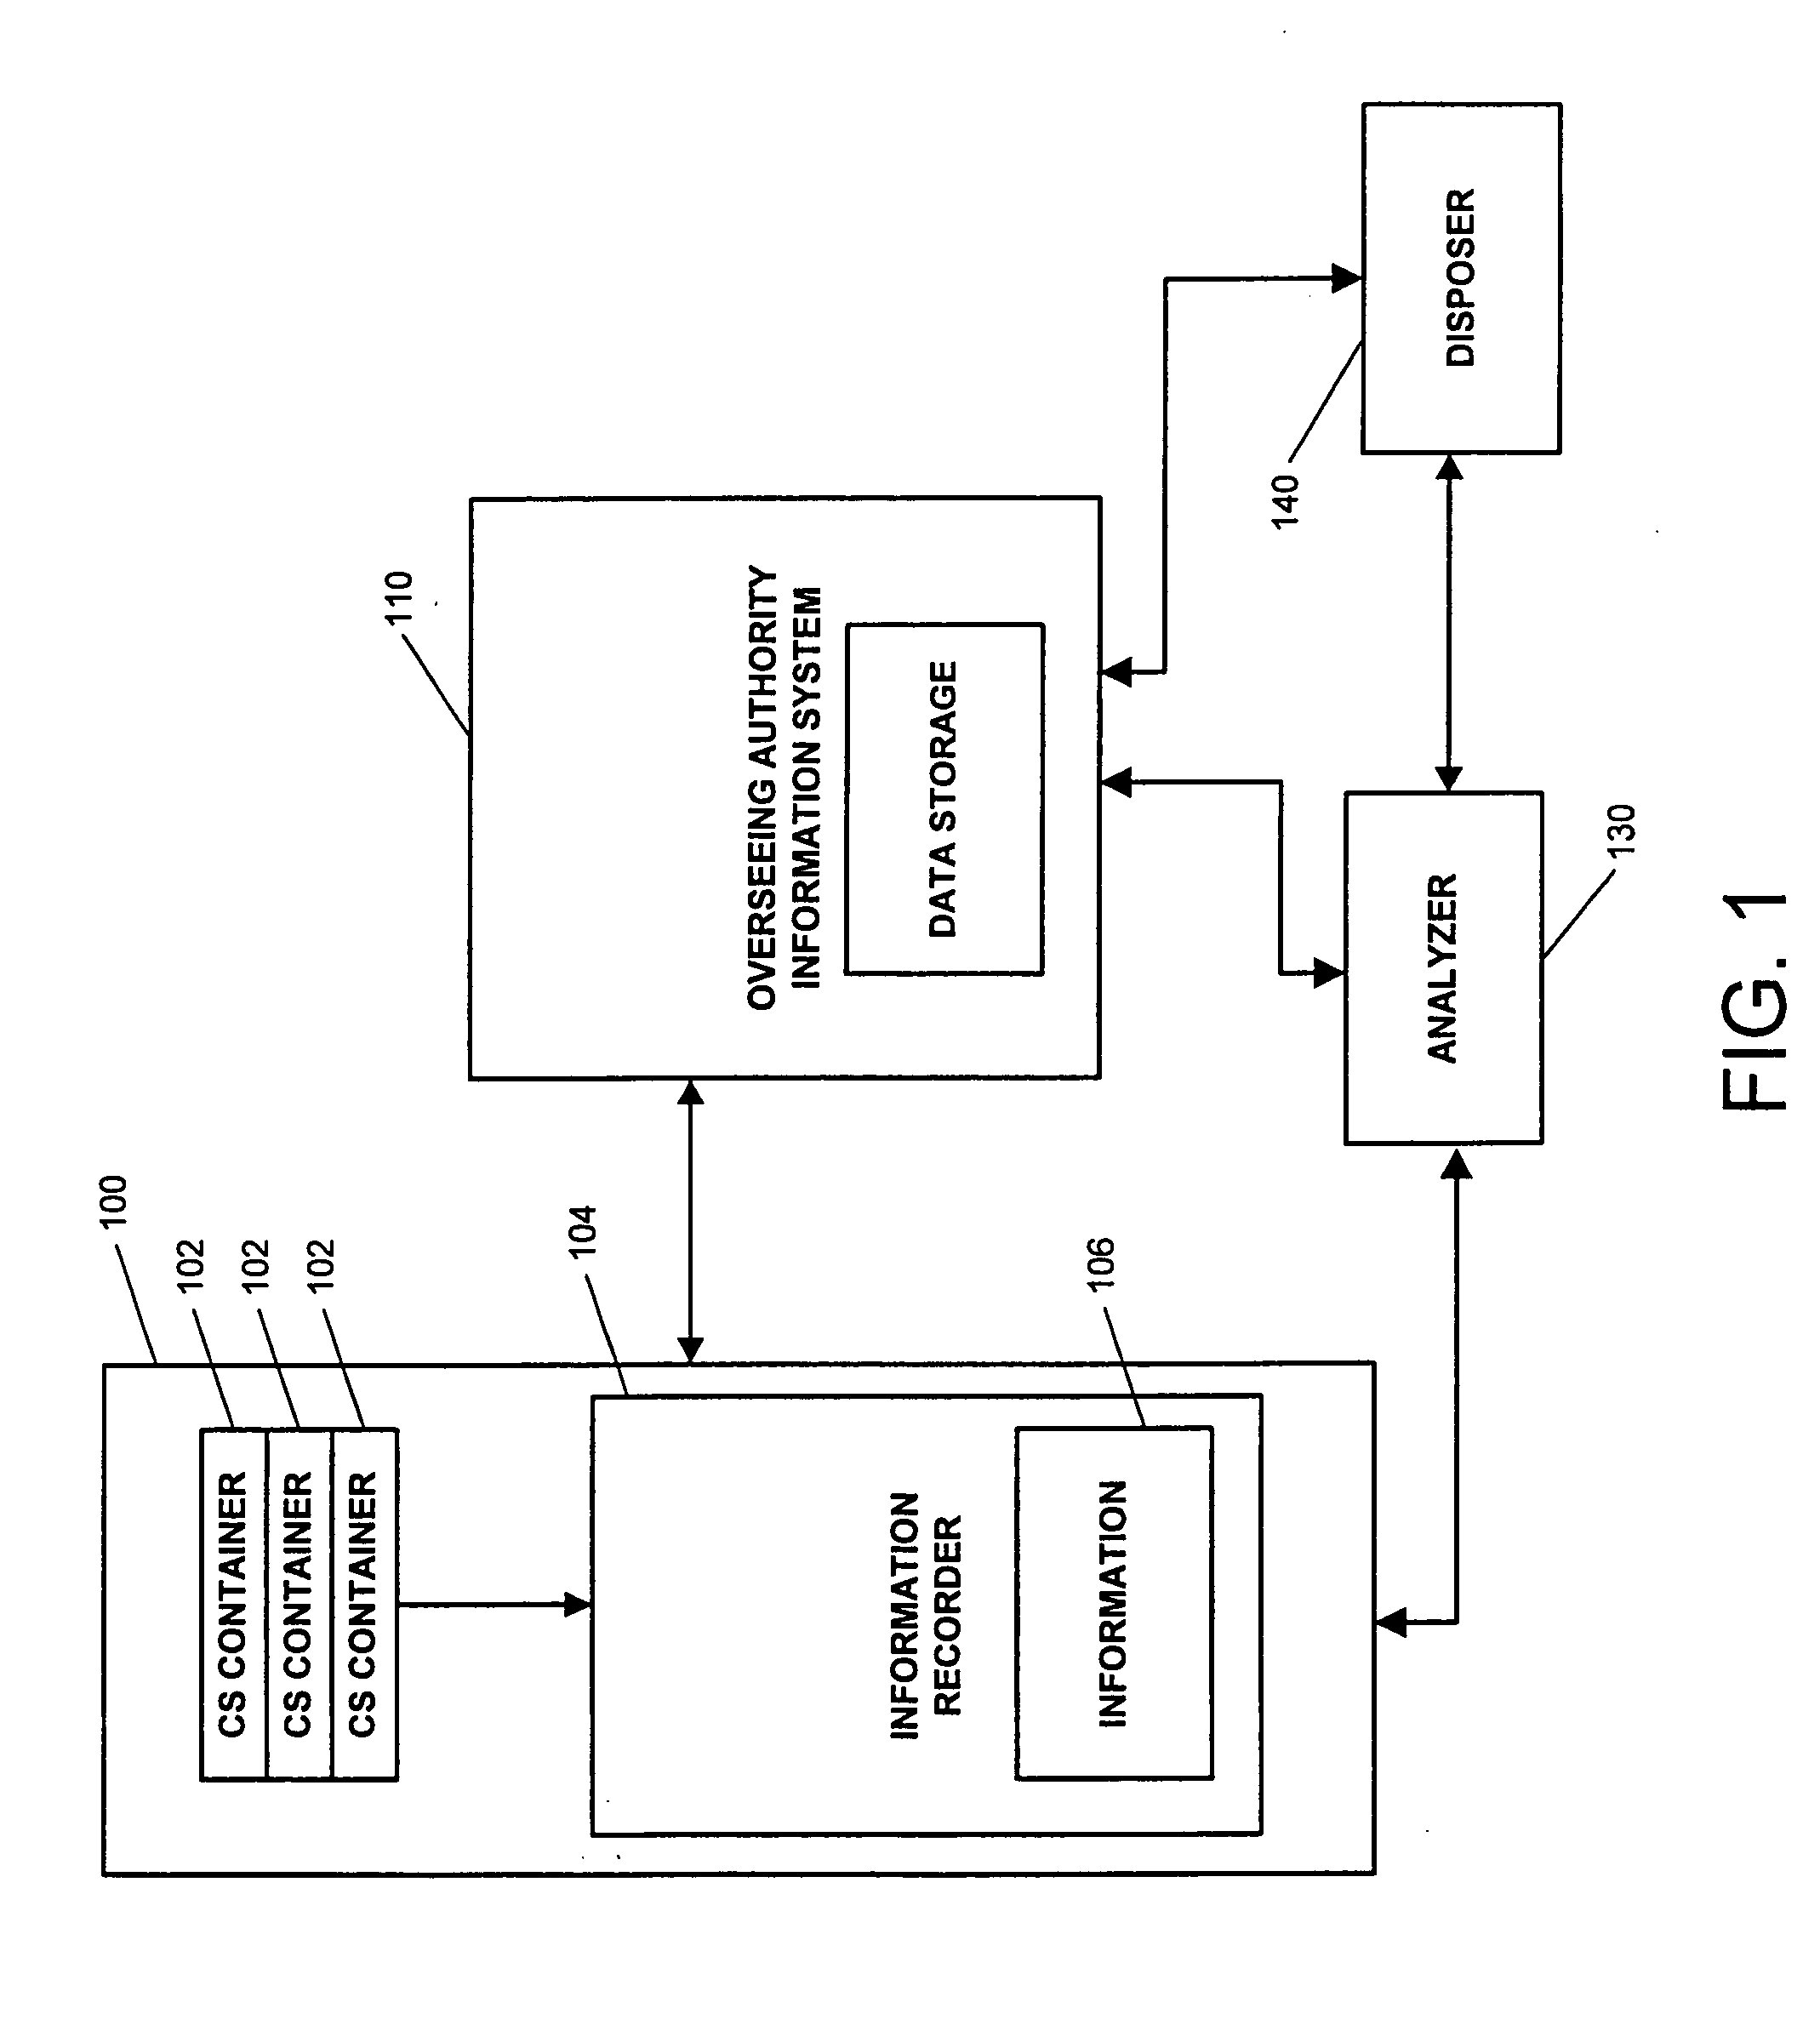 Controlled substance analysis, wastage disposal and documentation system, apparatus and method